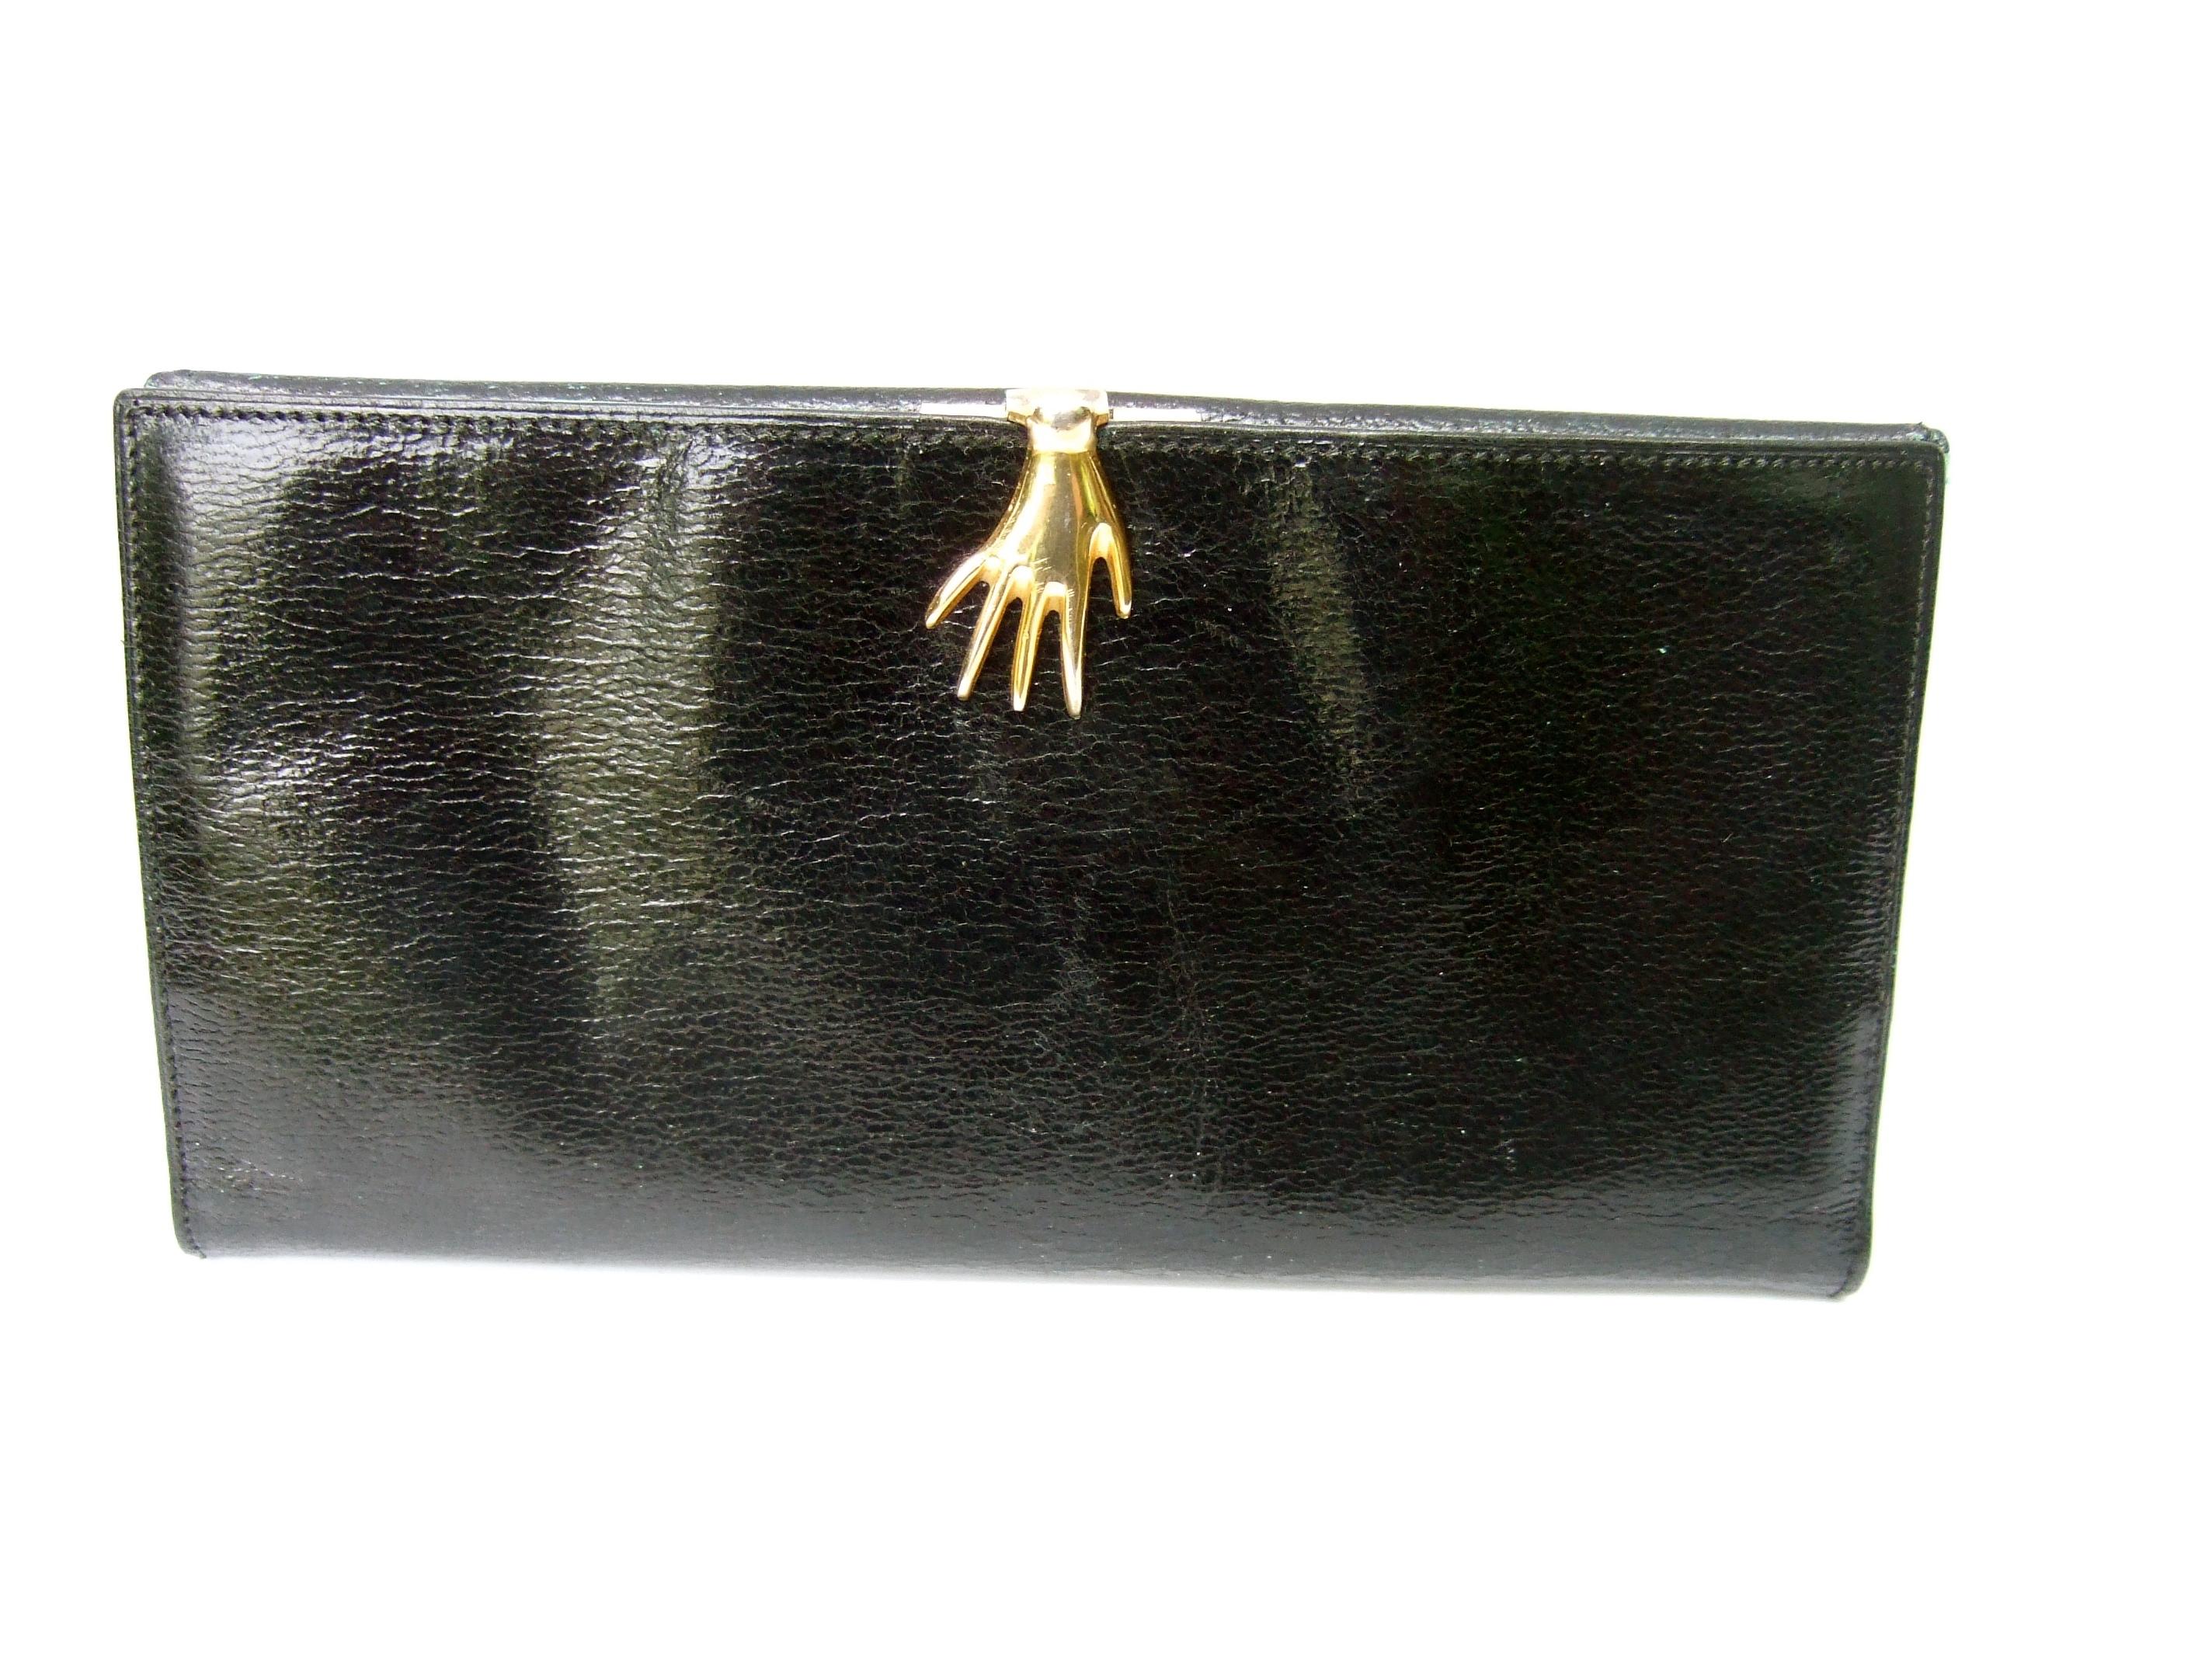 Gucci Italy Rare black leather hand clasp wallet c 1970s
The stylish Italian wallet is covered with smooth grainy black
leather with a sheen 

Adorned with a small gilt metal hand that serves as the clasp
mechanism. The interior is partially lined